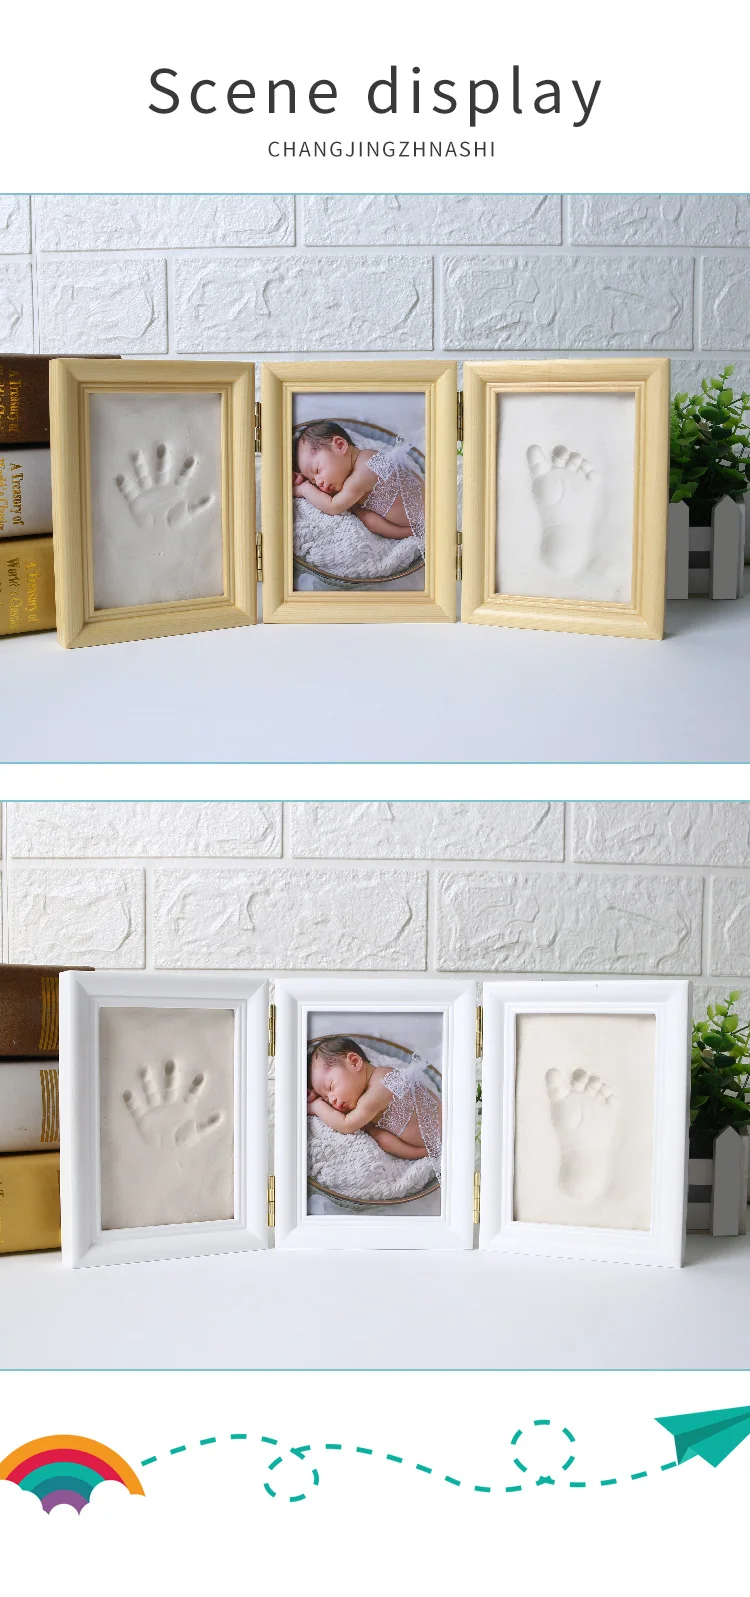 Mold Free Free Date & Name Stamp Baby Handprint Footprint Photo Frame Kit by Kubai for Newborn Girls & Boys Best Personalized Gifts for Shower Registry. Choice of Mats to fit Room Wall Nursery 